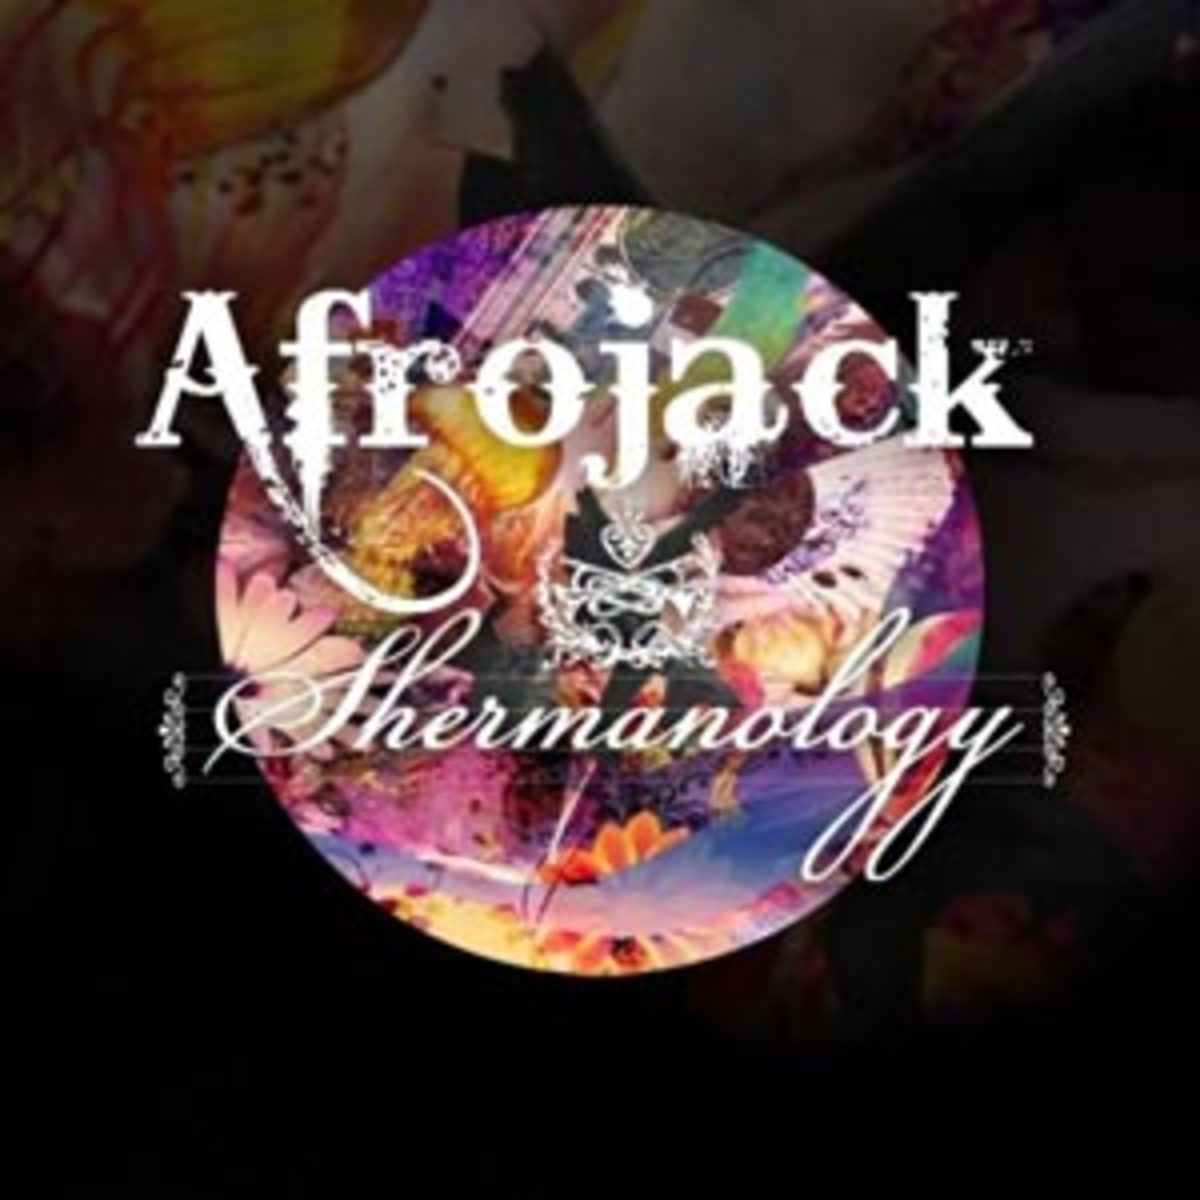 Afrojack-Shermanology-Cant-Stop-Me-Club-Mix